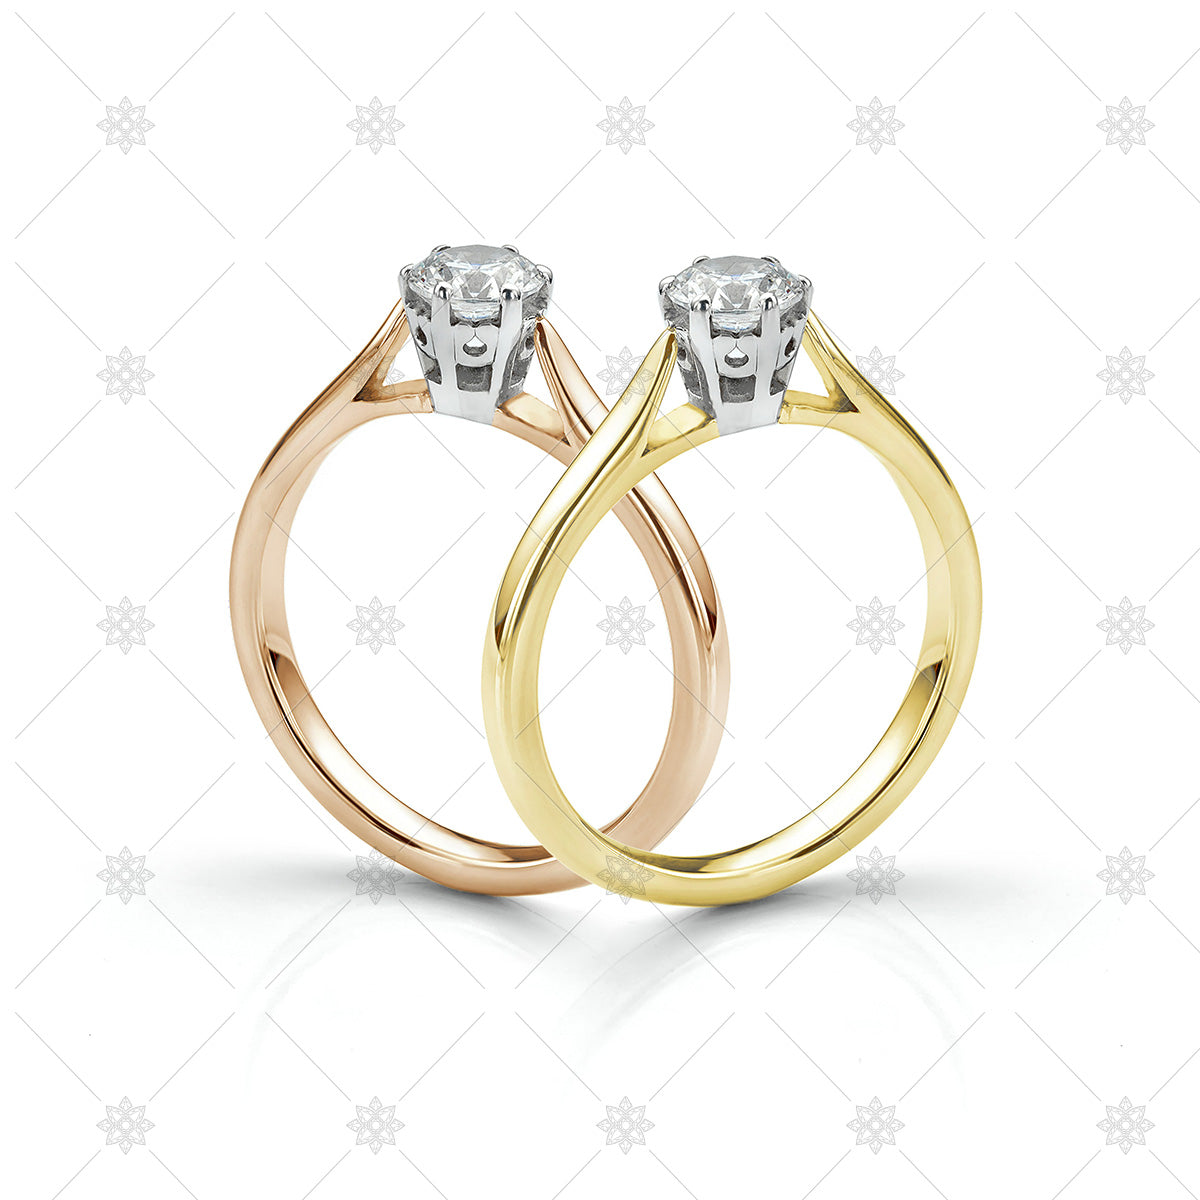 18ct Gold Solitaire Diamond Rings - LS1010